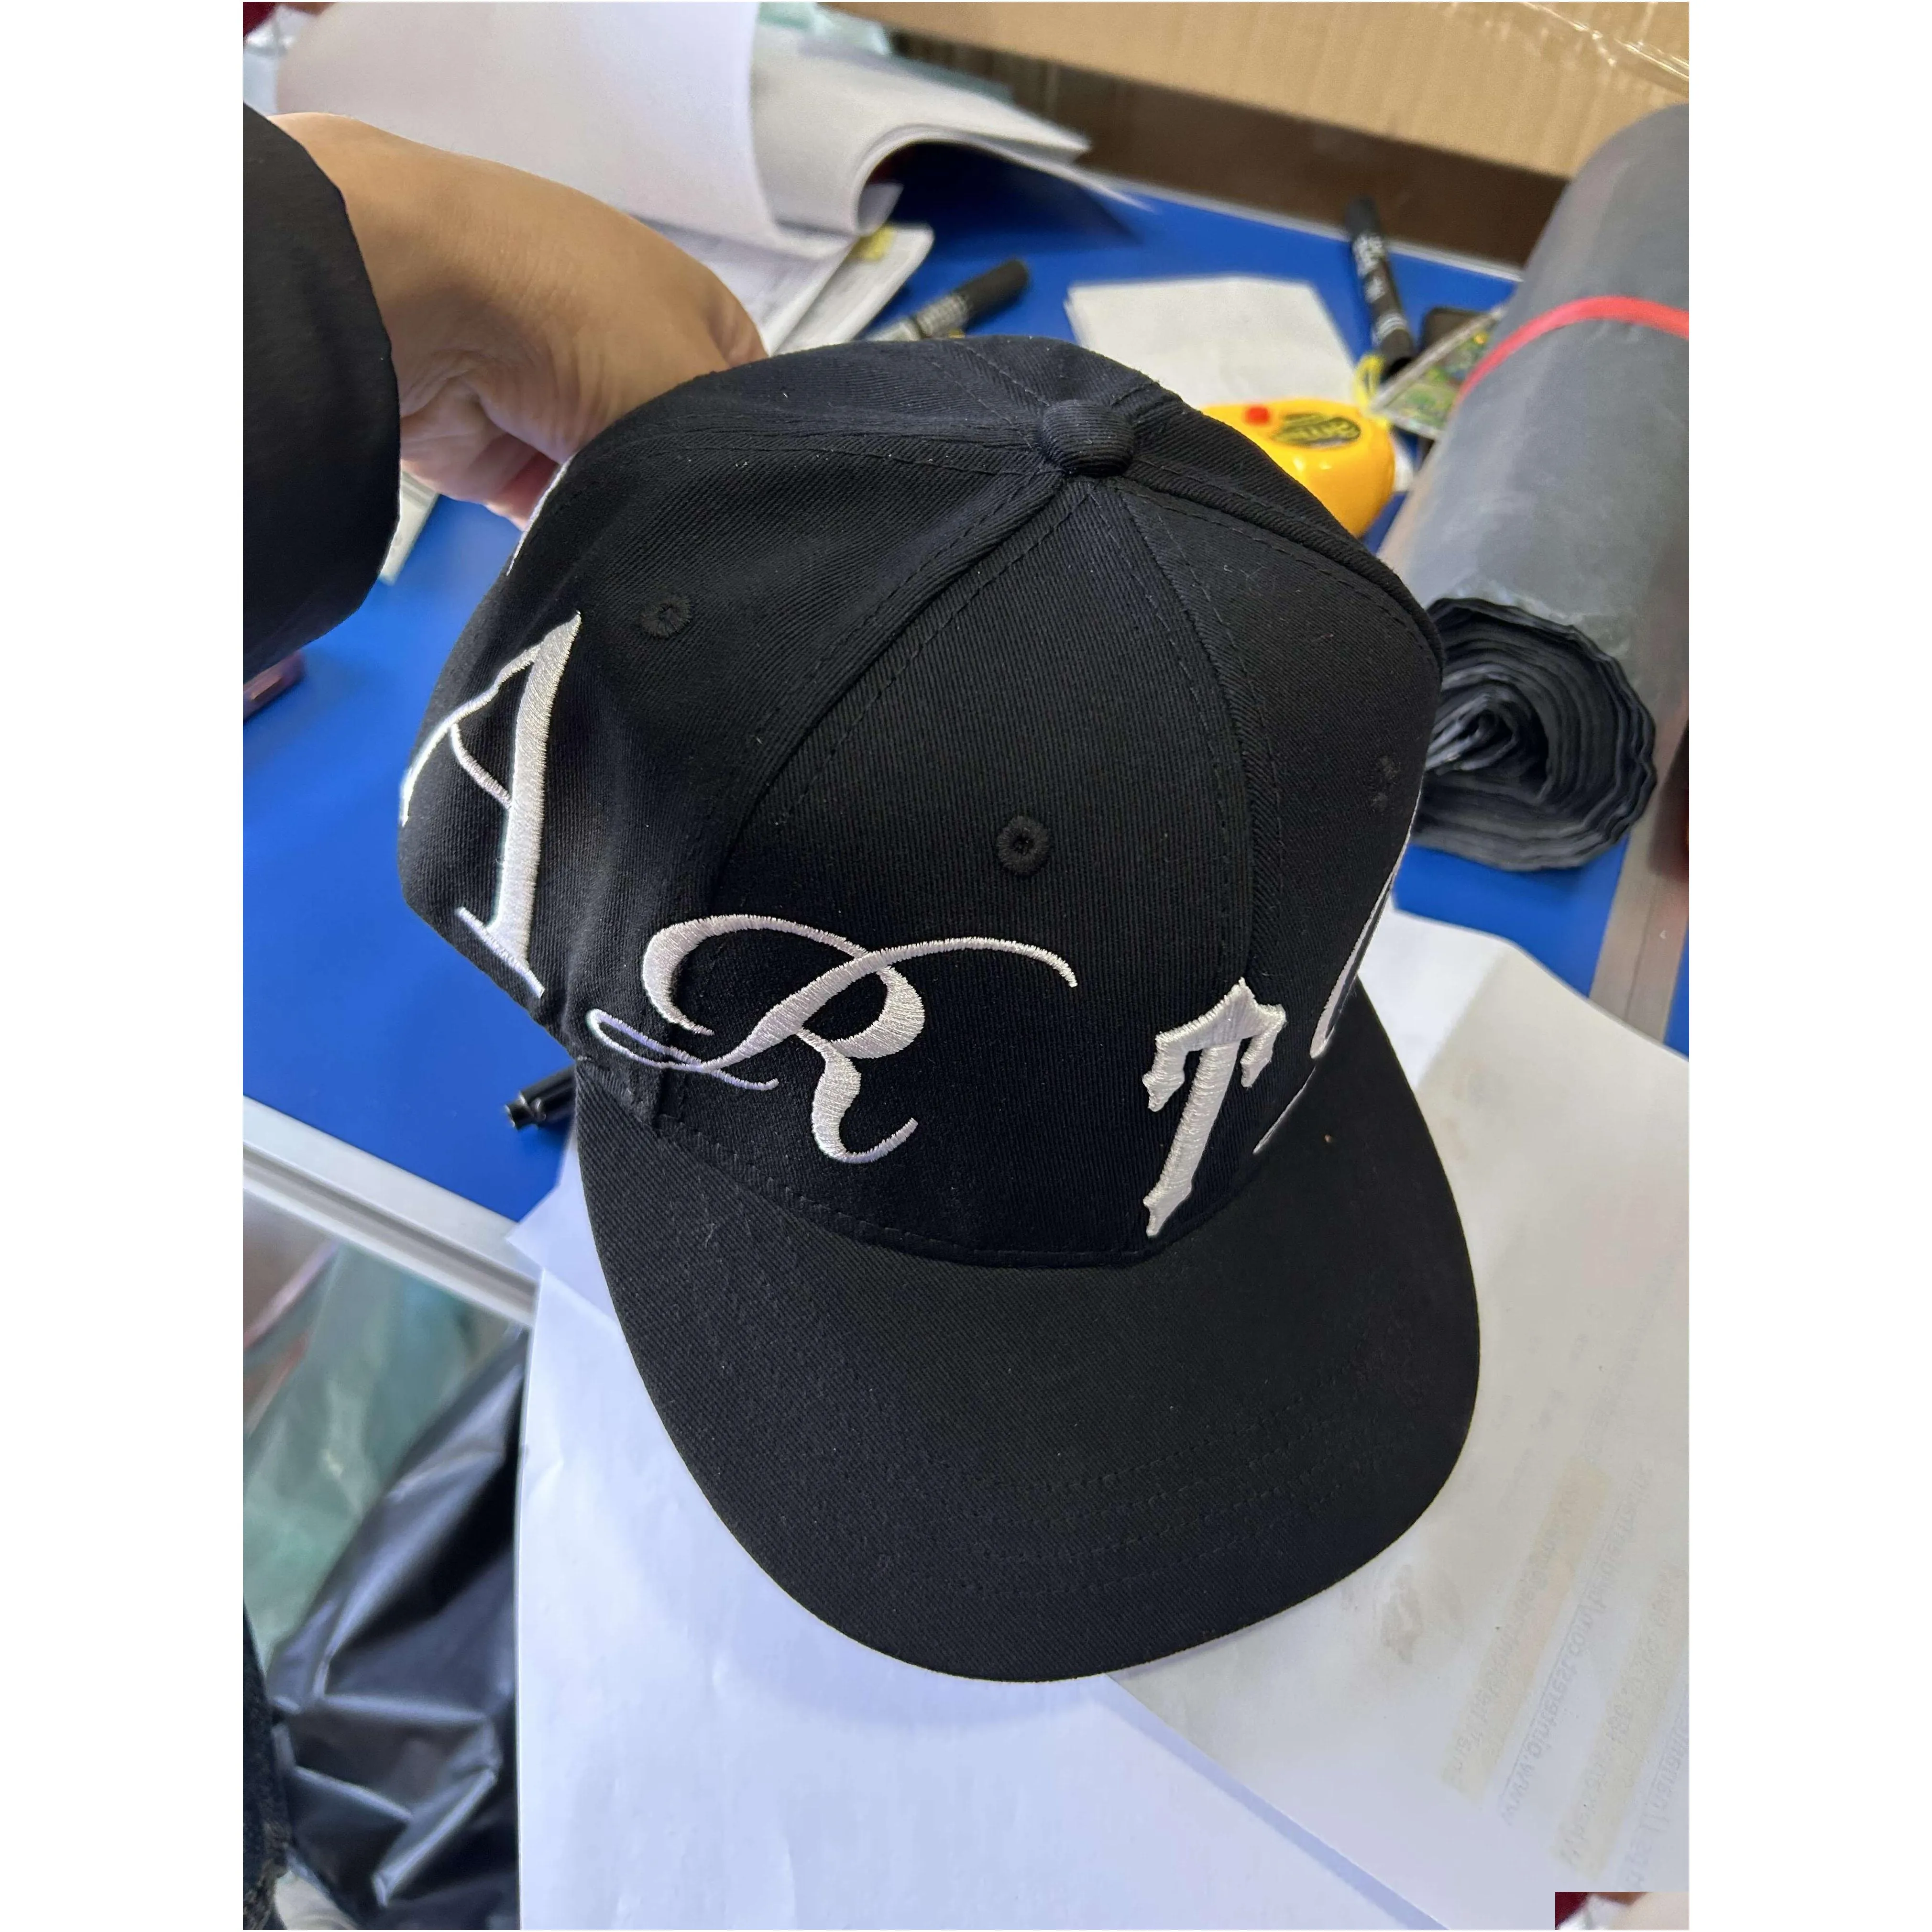 couple trapstar designer baseball cap sporty lettering embroidery casquette fashion accessories hats scarves